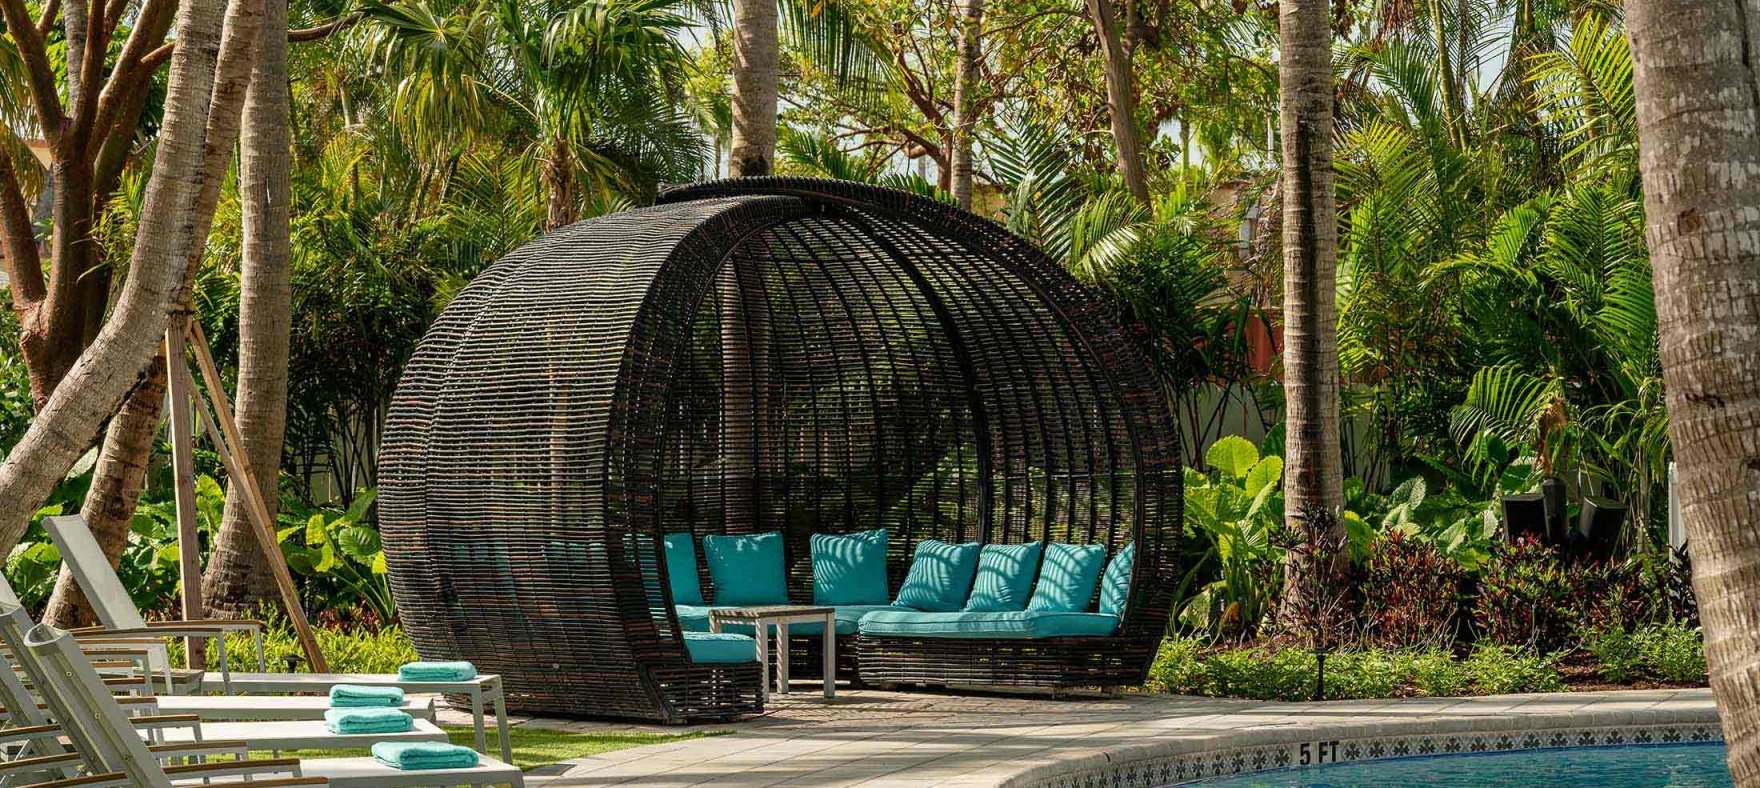 Lined lounge chairs next to the woven gazebo overlooking the pool